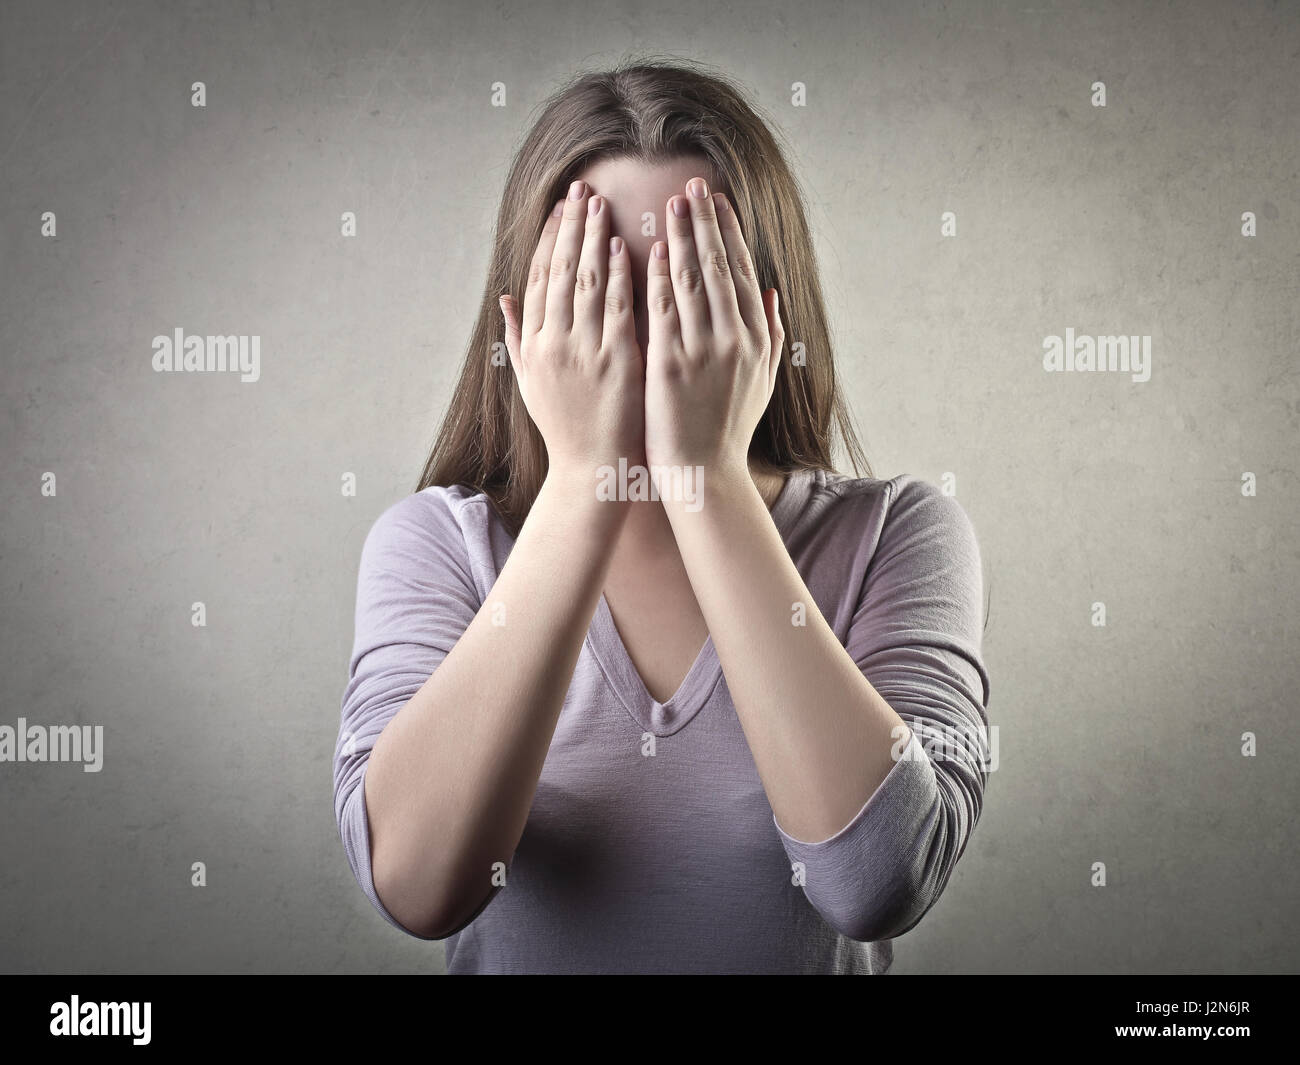 Woman covering her face with her hands Stock Photo